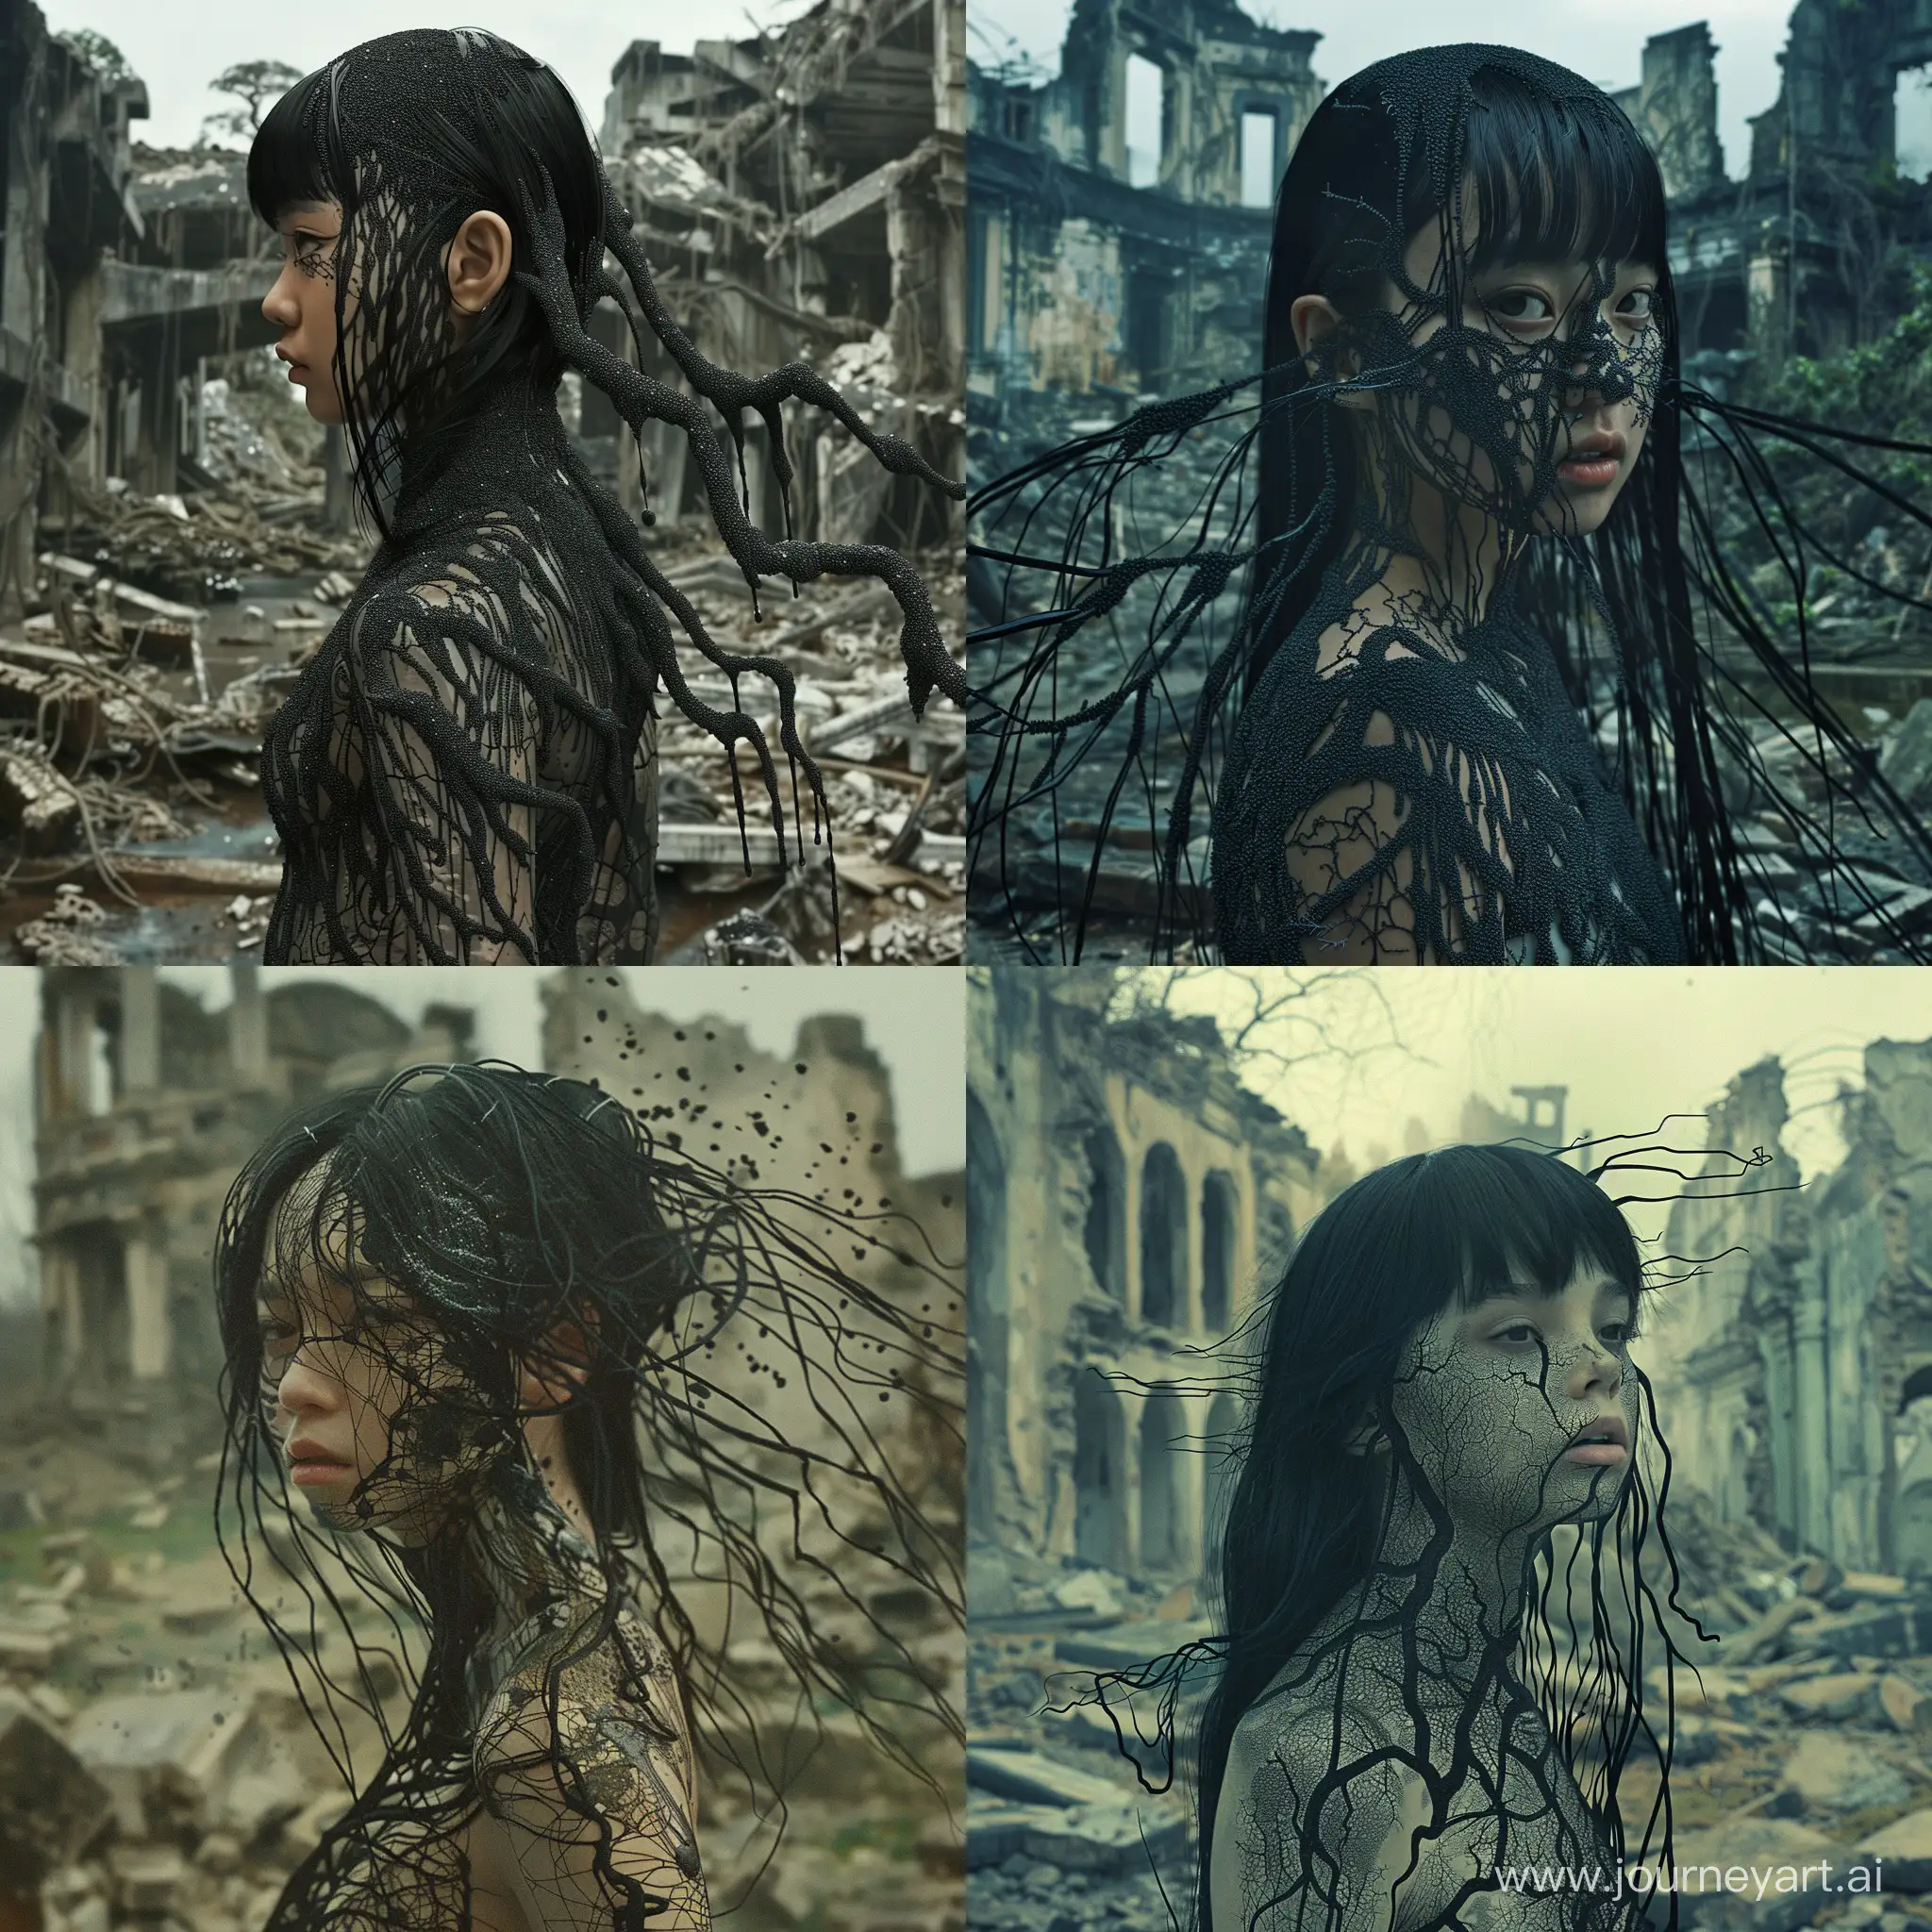 Futuristic-BlackHaired-Woman-with-Nervous-System-Patterns-amidst-Overgrown-Ruins